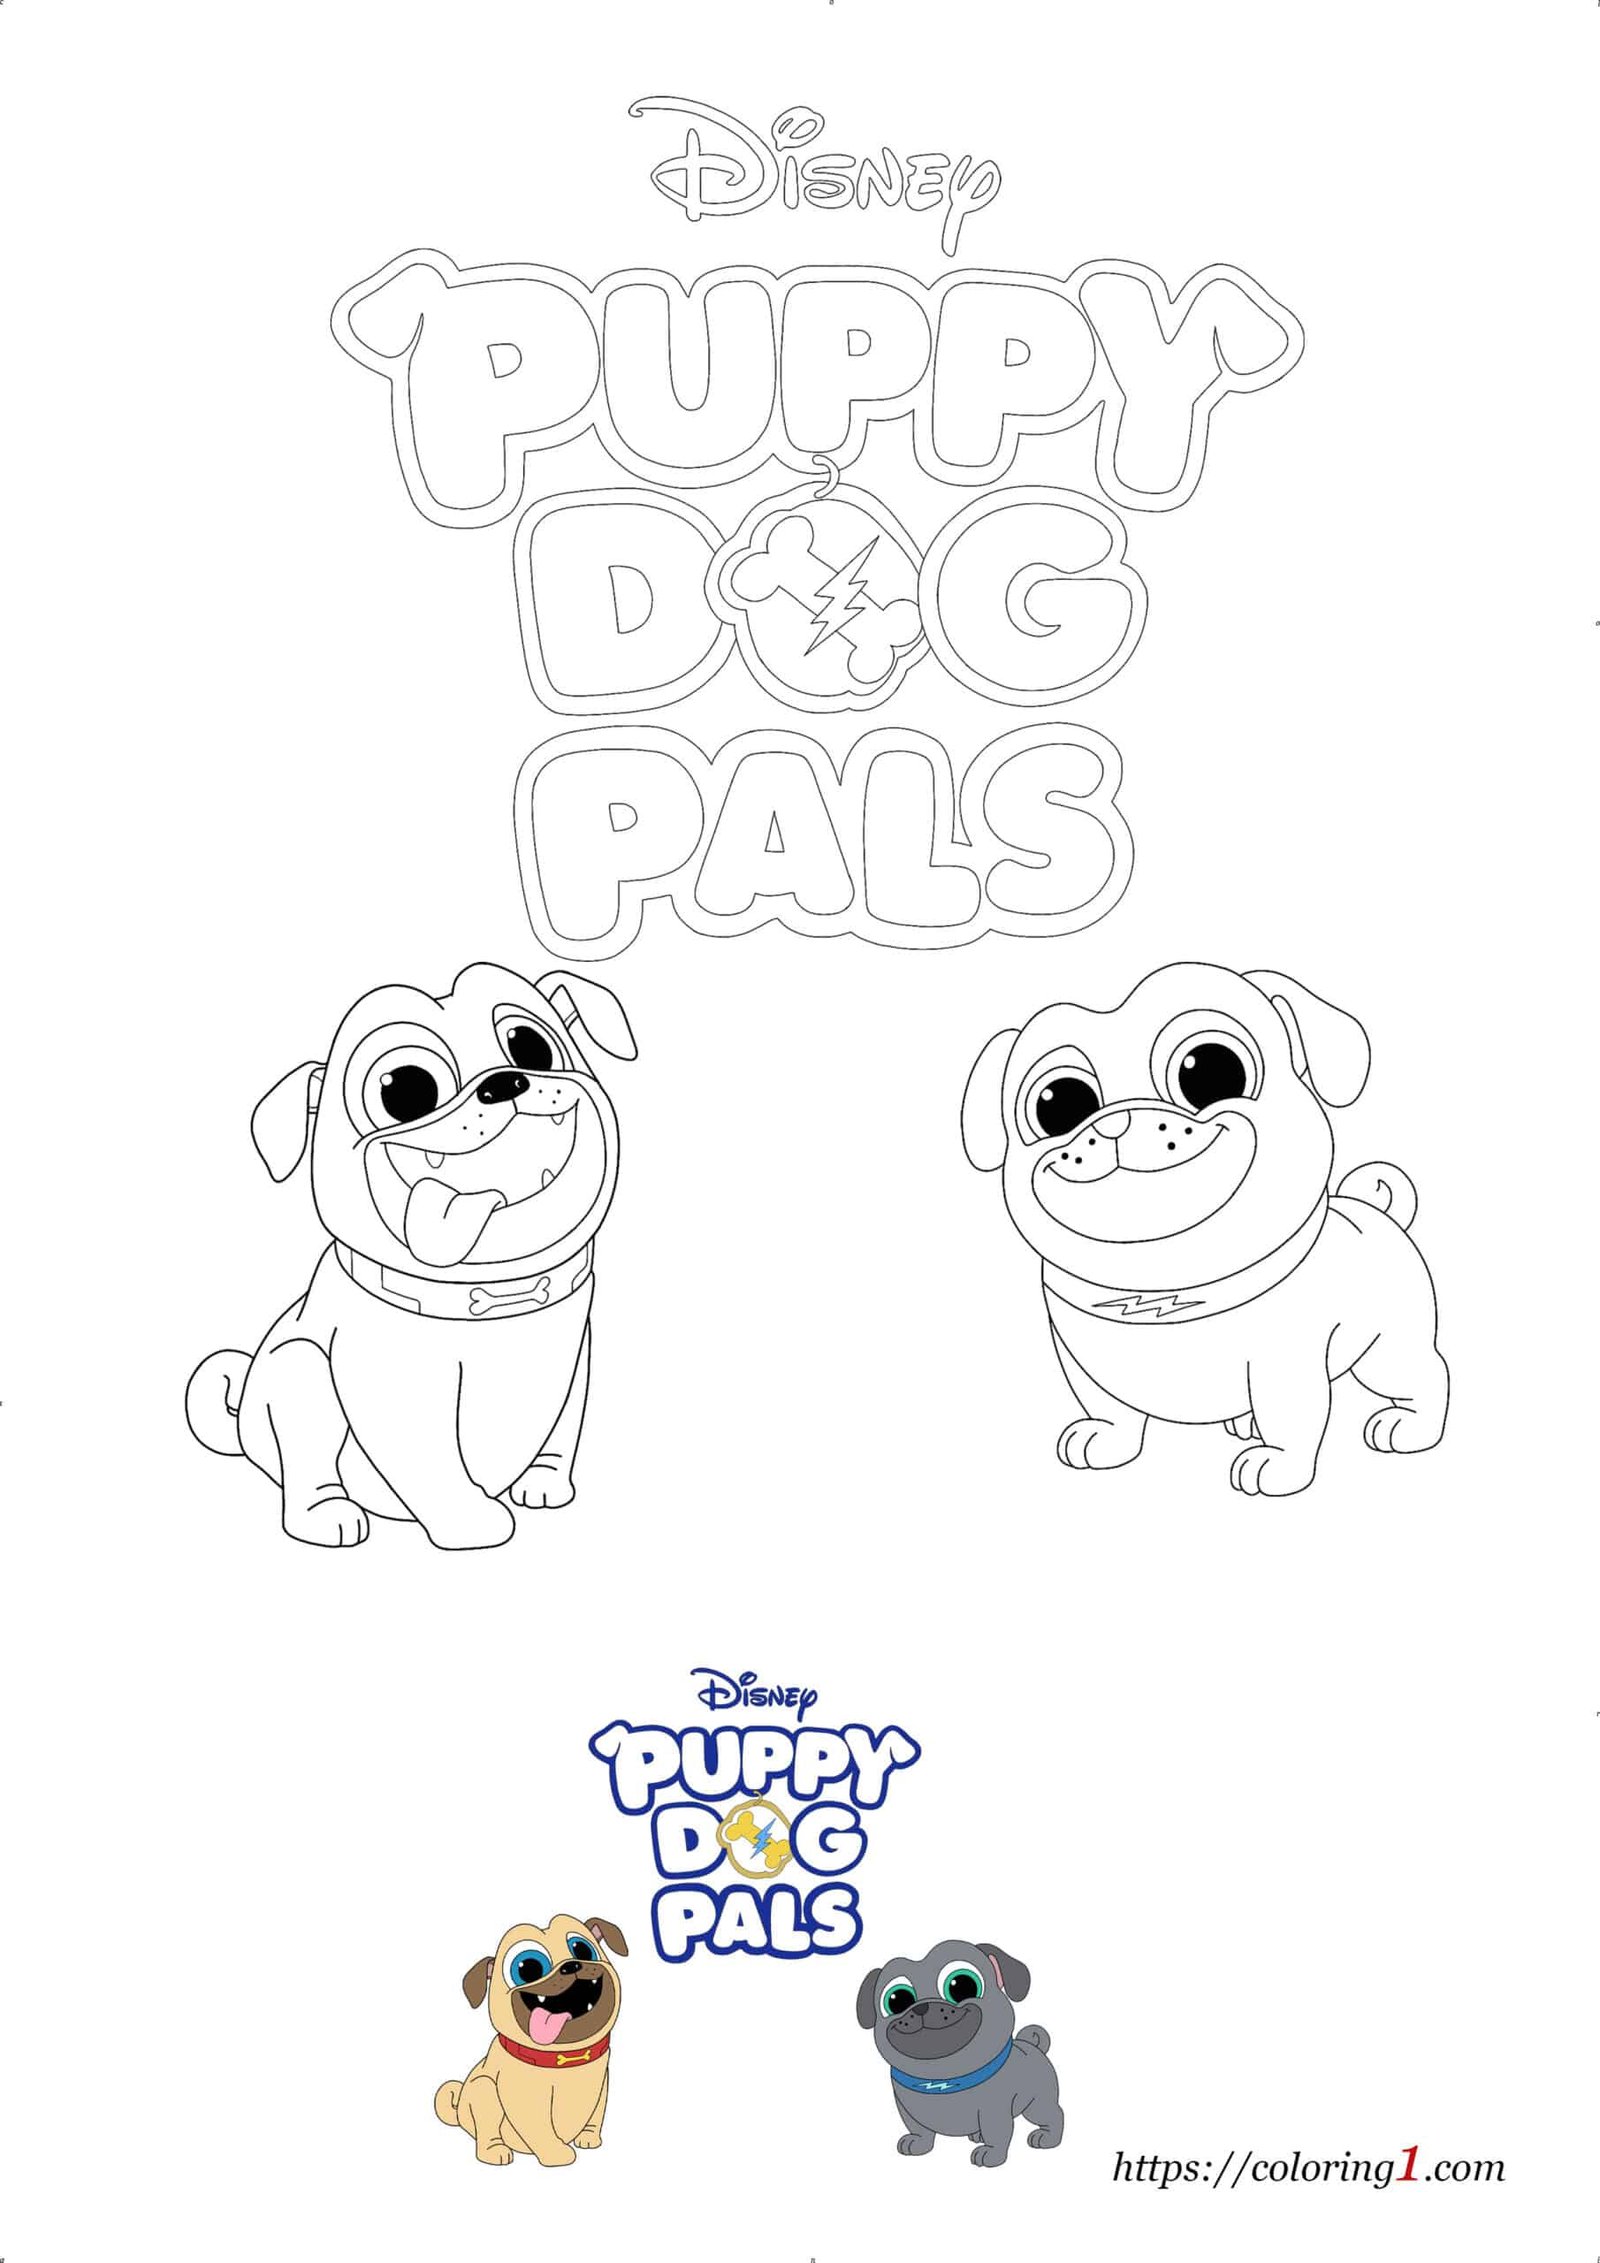 Puppy Dog Pals free printable coloring page for kids